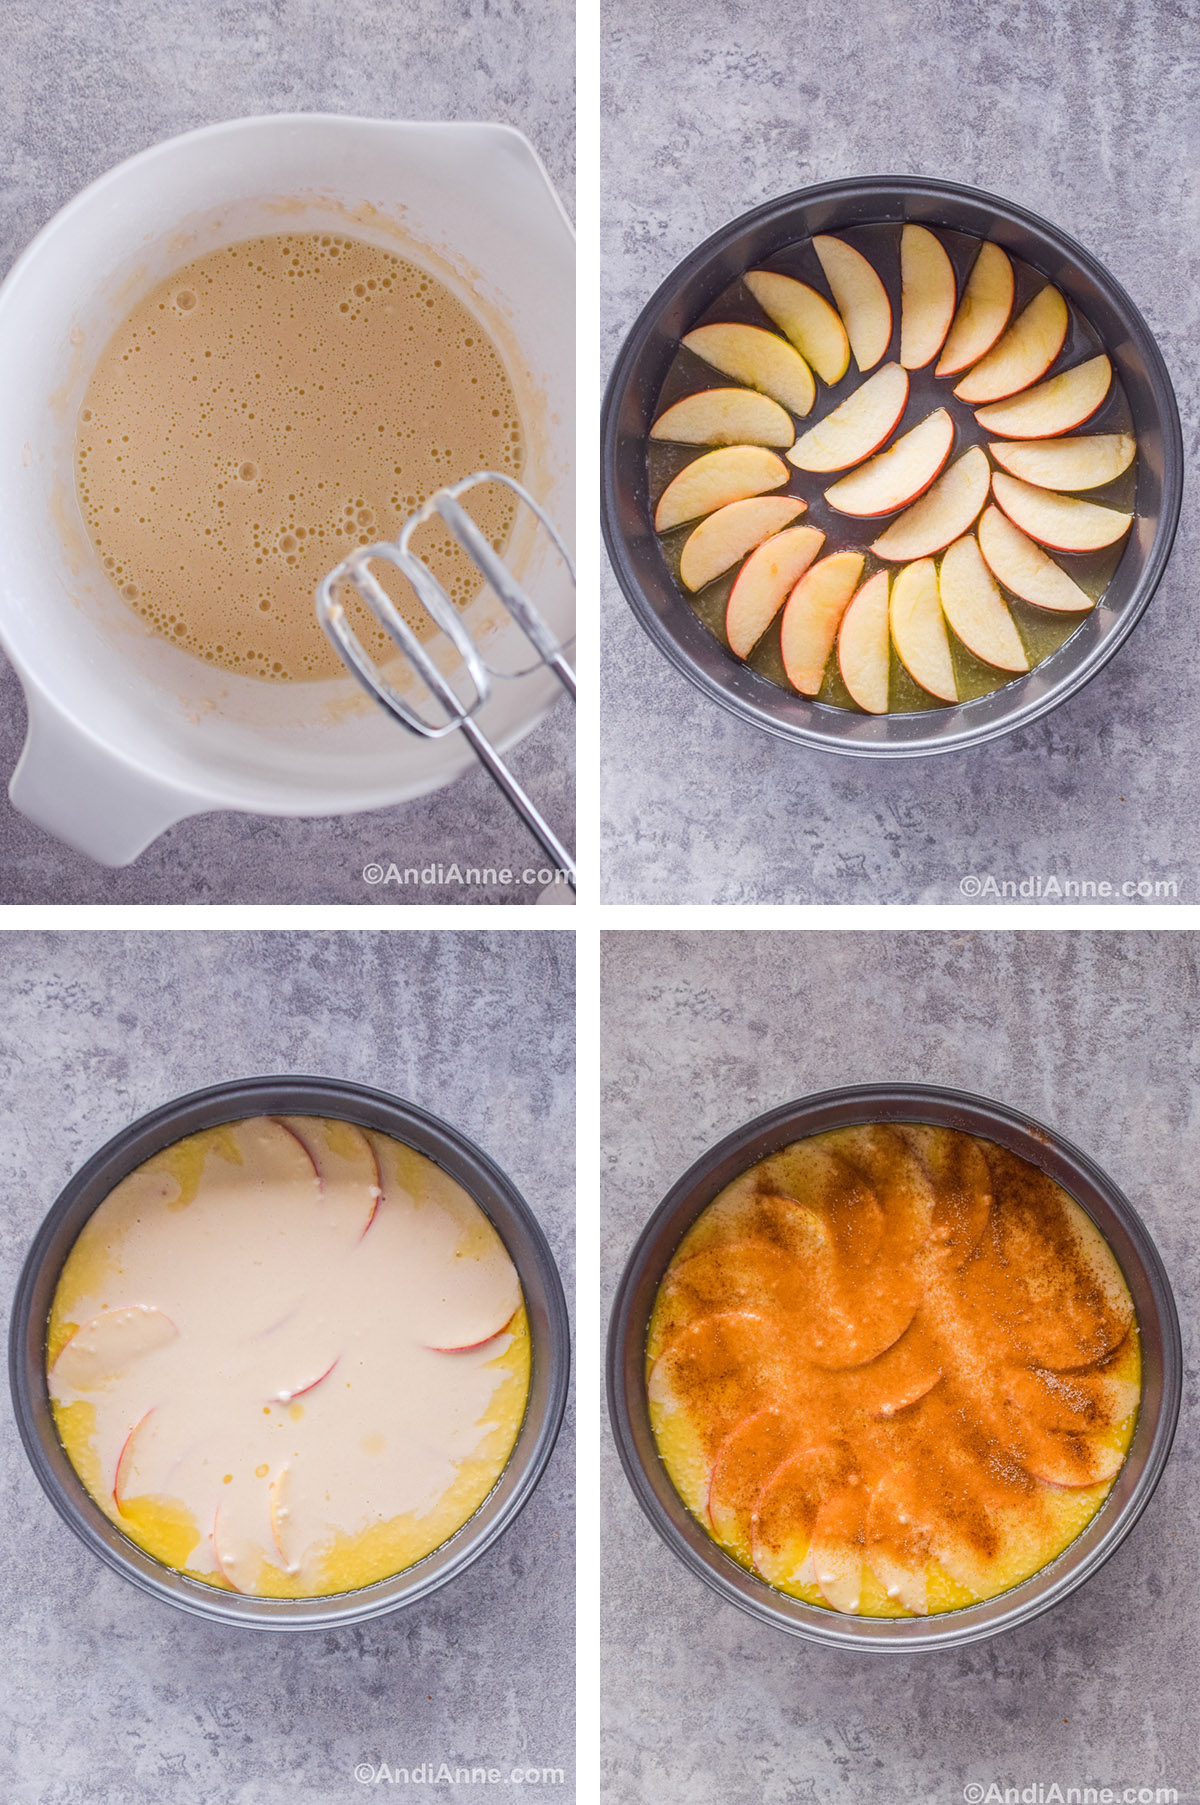 Four images showing steps to make the recipe including a white bowl with batter and a hand mixer. A grey cake pan with slices of apple arranged in the bottom. Third is batter poured overtop of apples in cake pan. Fourth is cinnamon sugar sprinkled overtop of batter in cake pan.